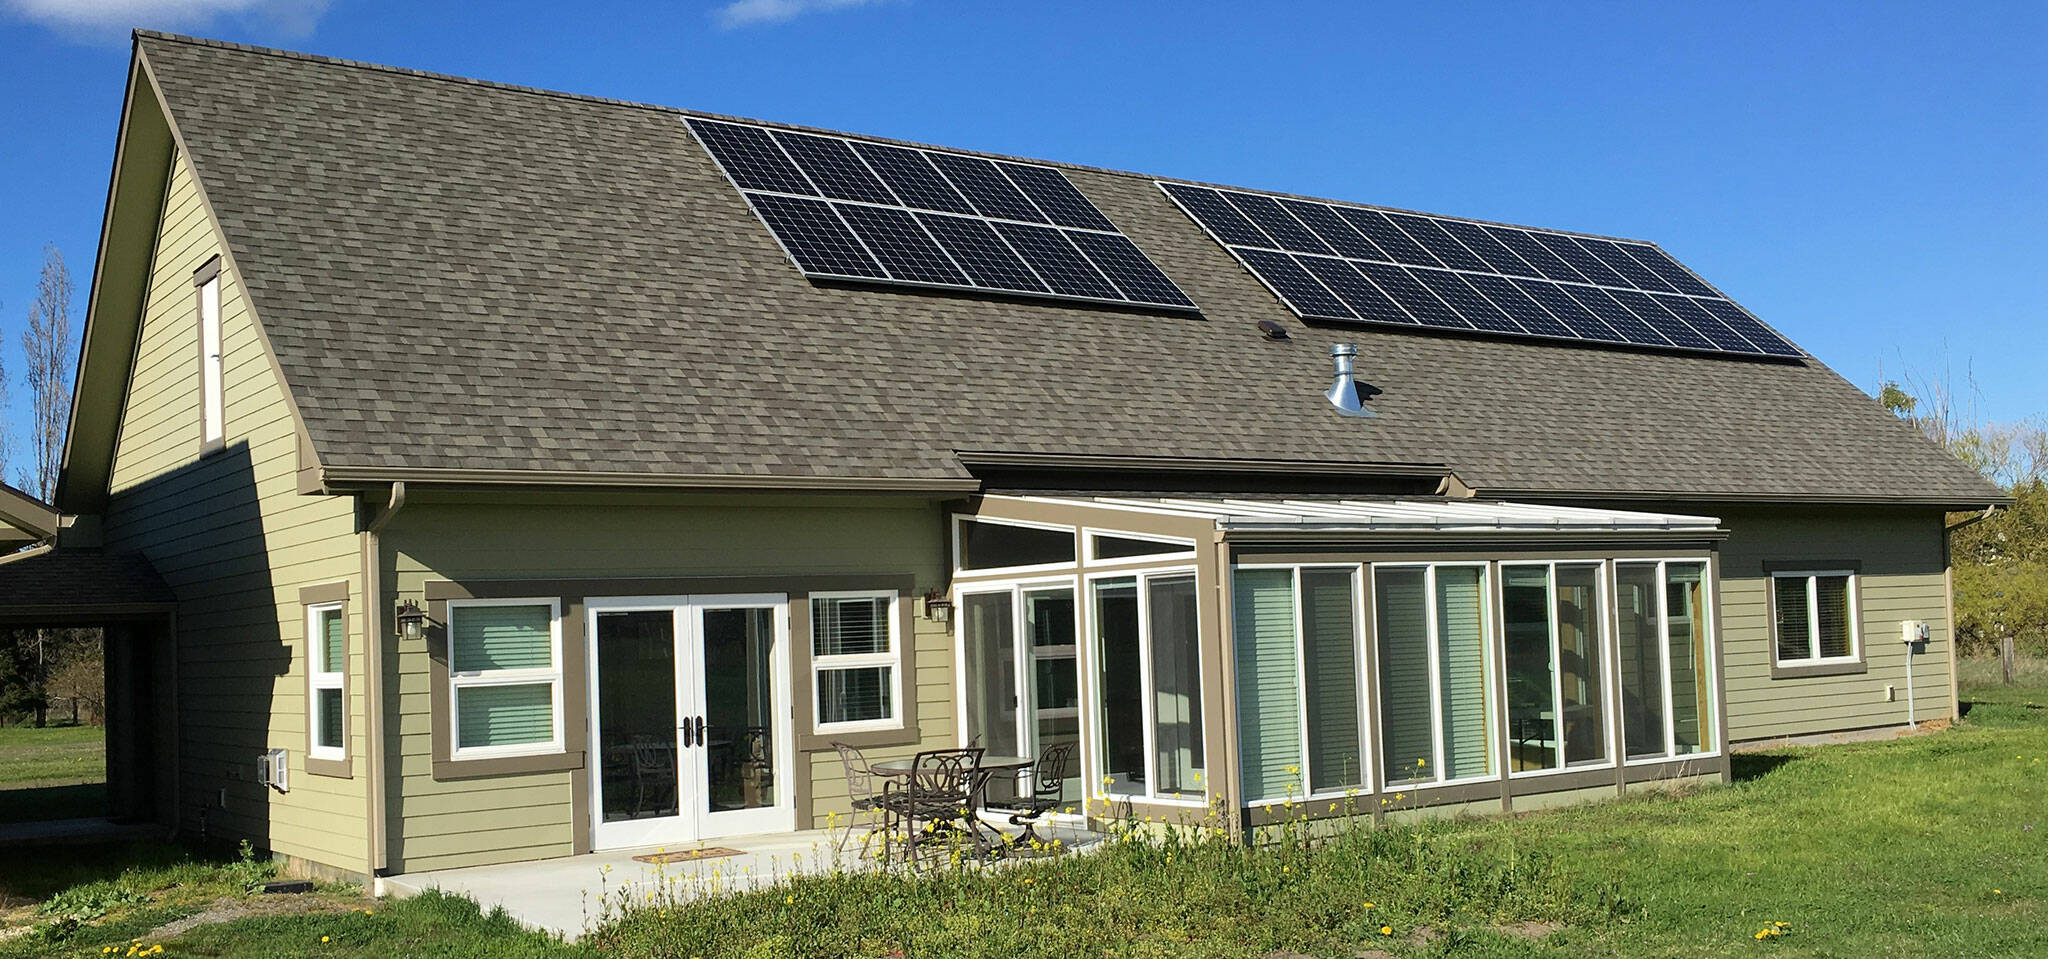 Submitted photo
A 2,200-square-foot, “net-zero passive home” that produces more energy than uses is part of the National Solar Tour from 9 a.m.-5 p.m. Saturday, Oct. 1, at 173 Griffith Farm Road in Sequim. No appointments needed.